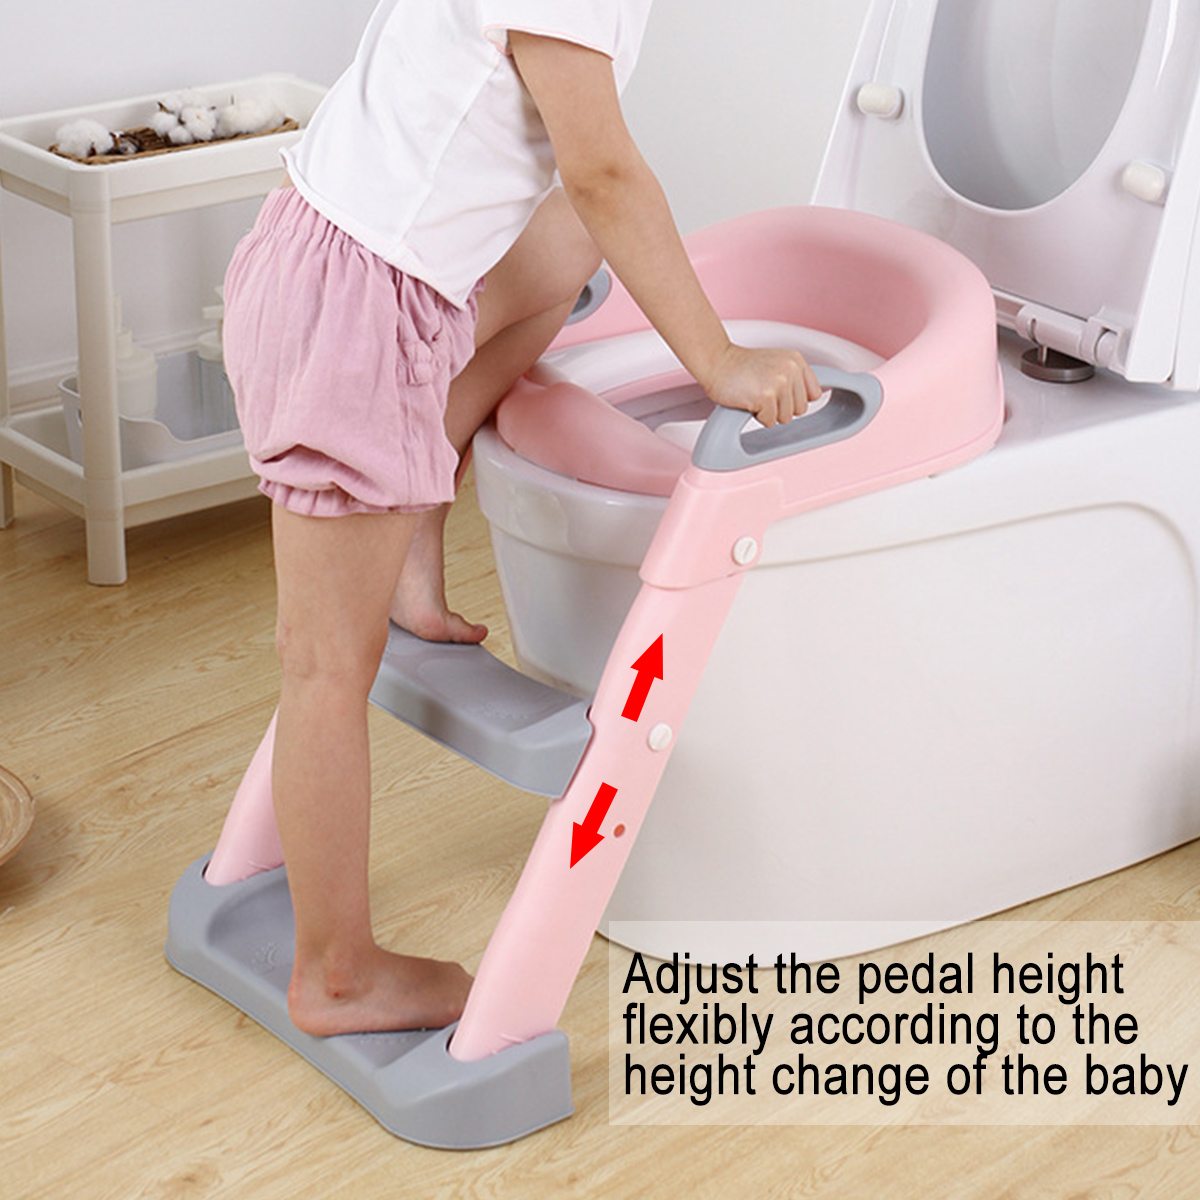 Non-Slip Kids Toilet Potty Summer Potty Chair Soft Padded Seat Step Up Training Stool Chair Toddler Ladder Comfortable with Soft Cushion - image 2 of 7